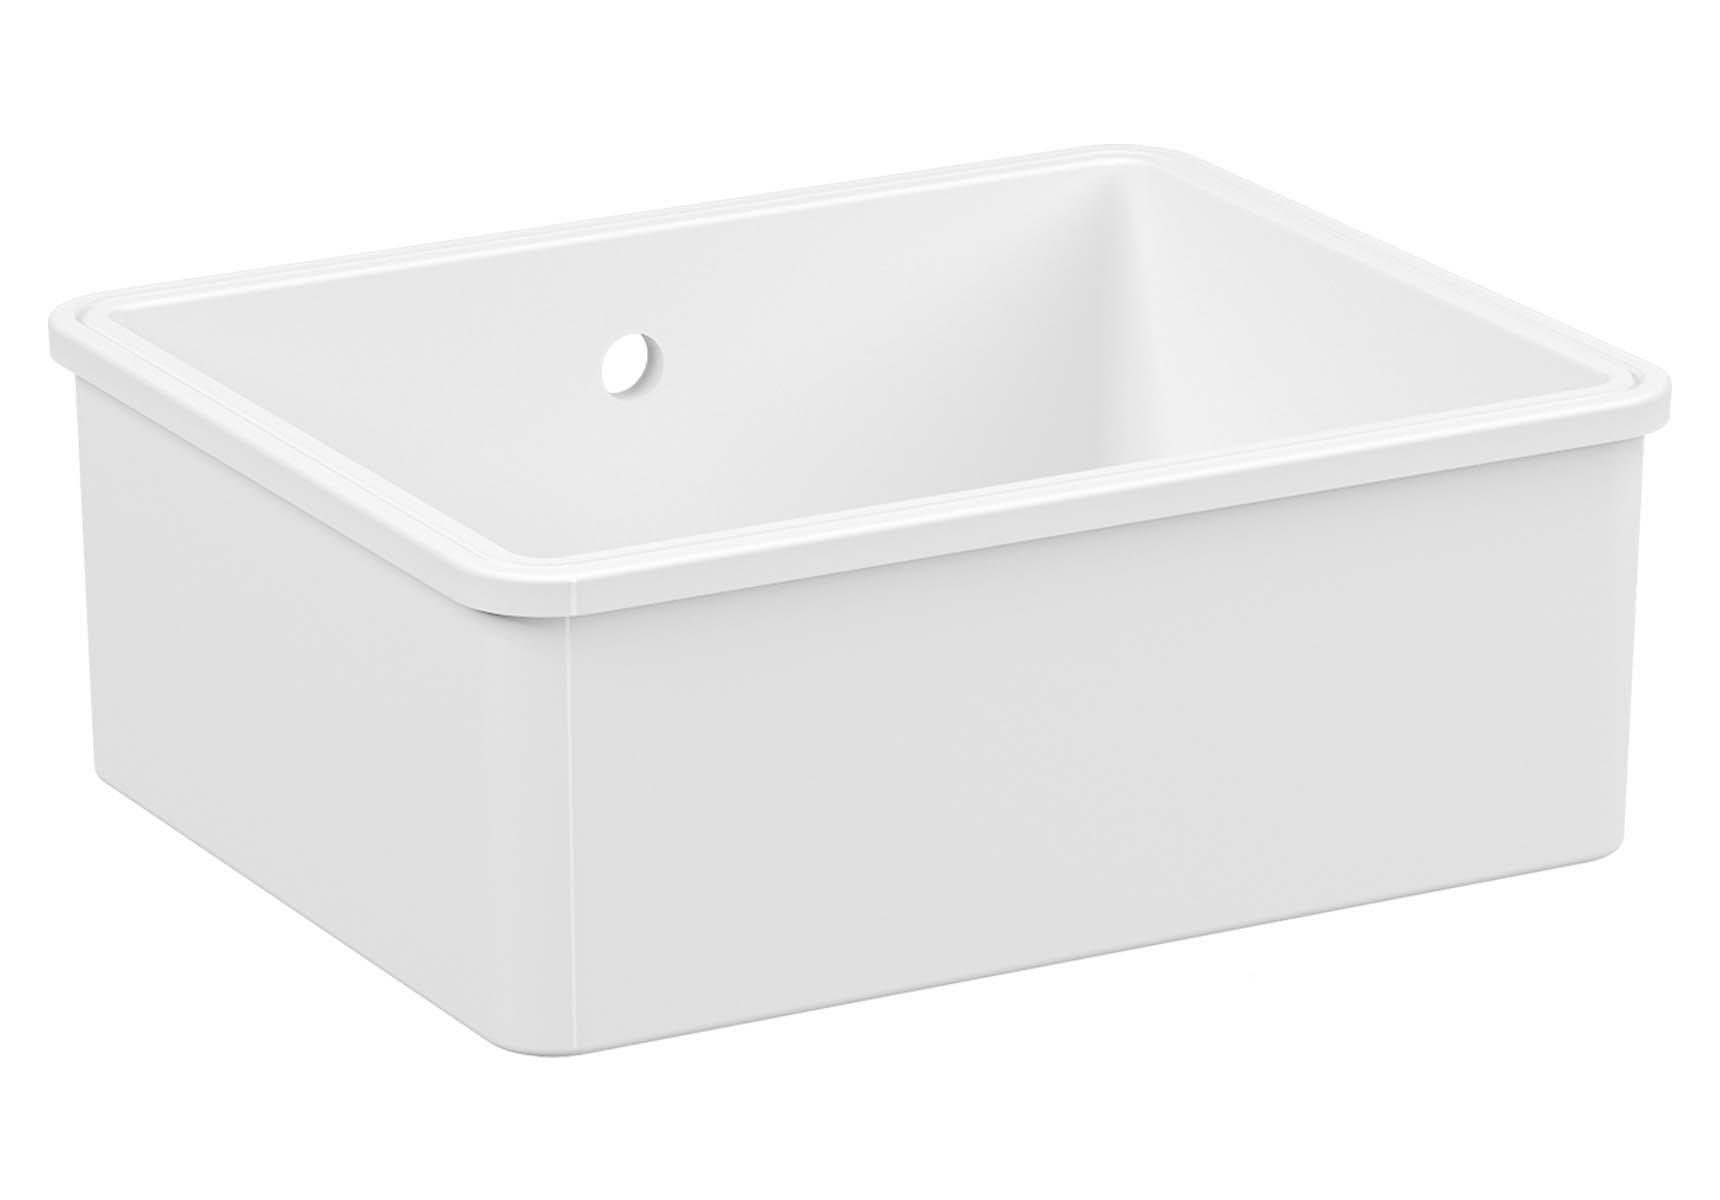 Undercounter Sink, 55 cm, 1 bowl, without tap hole, with overflow hole, matte mink